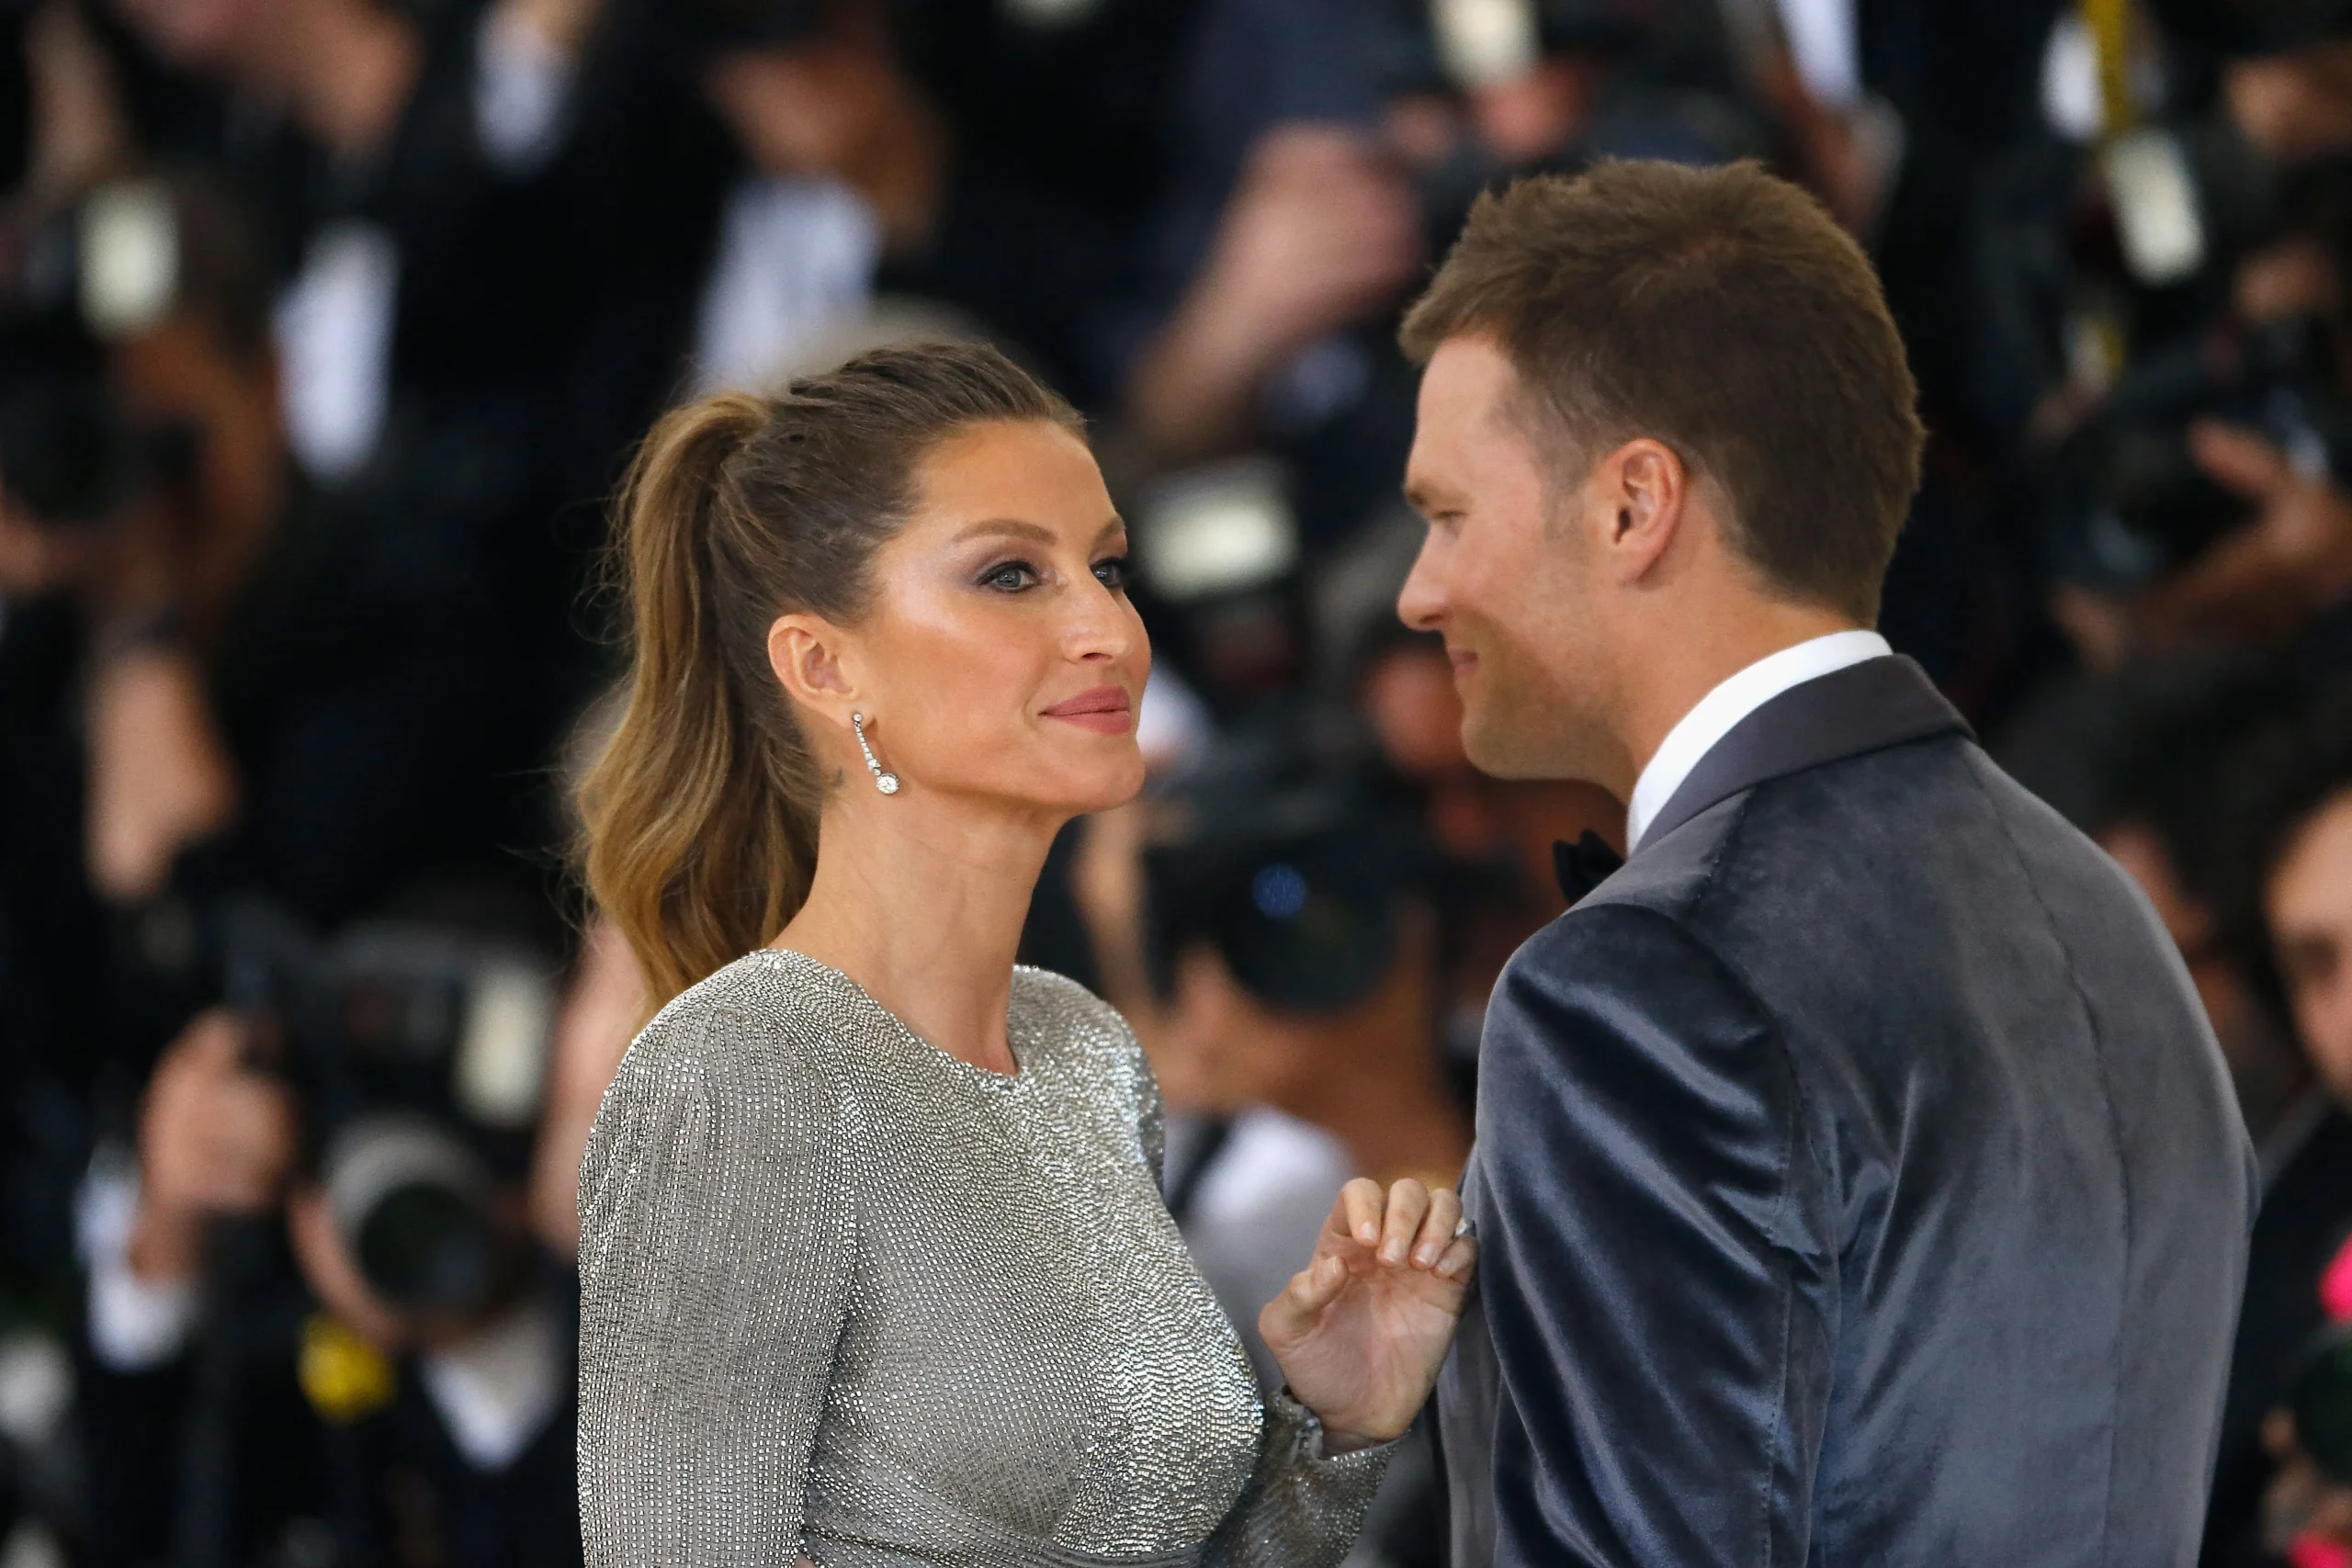 Gisele Bündchen Is Pissed About the Divorce Jokes at the Tom Brady Roast